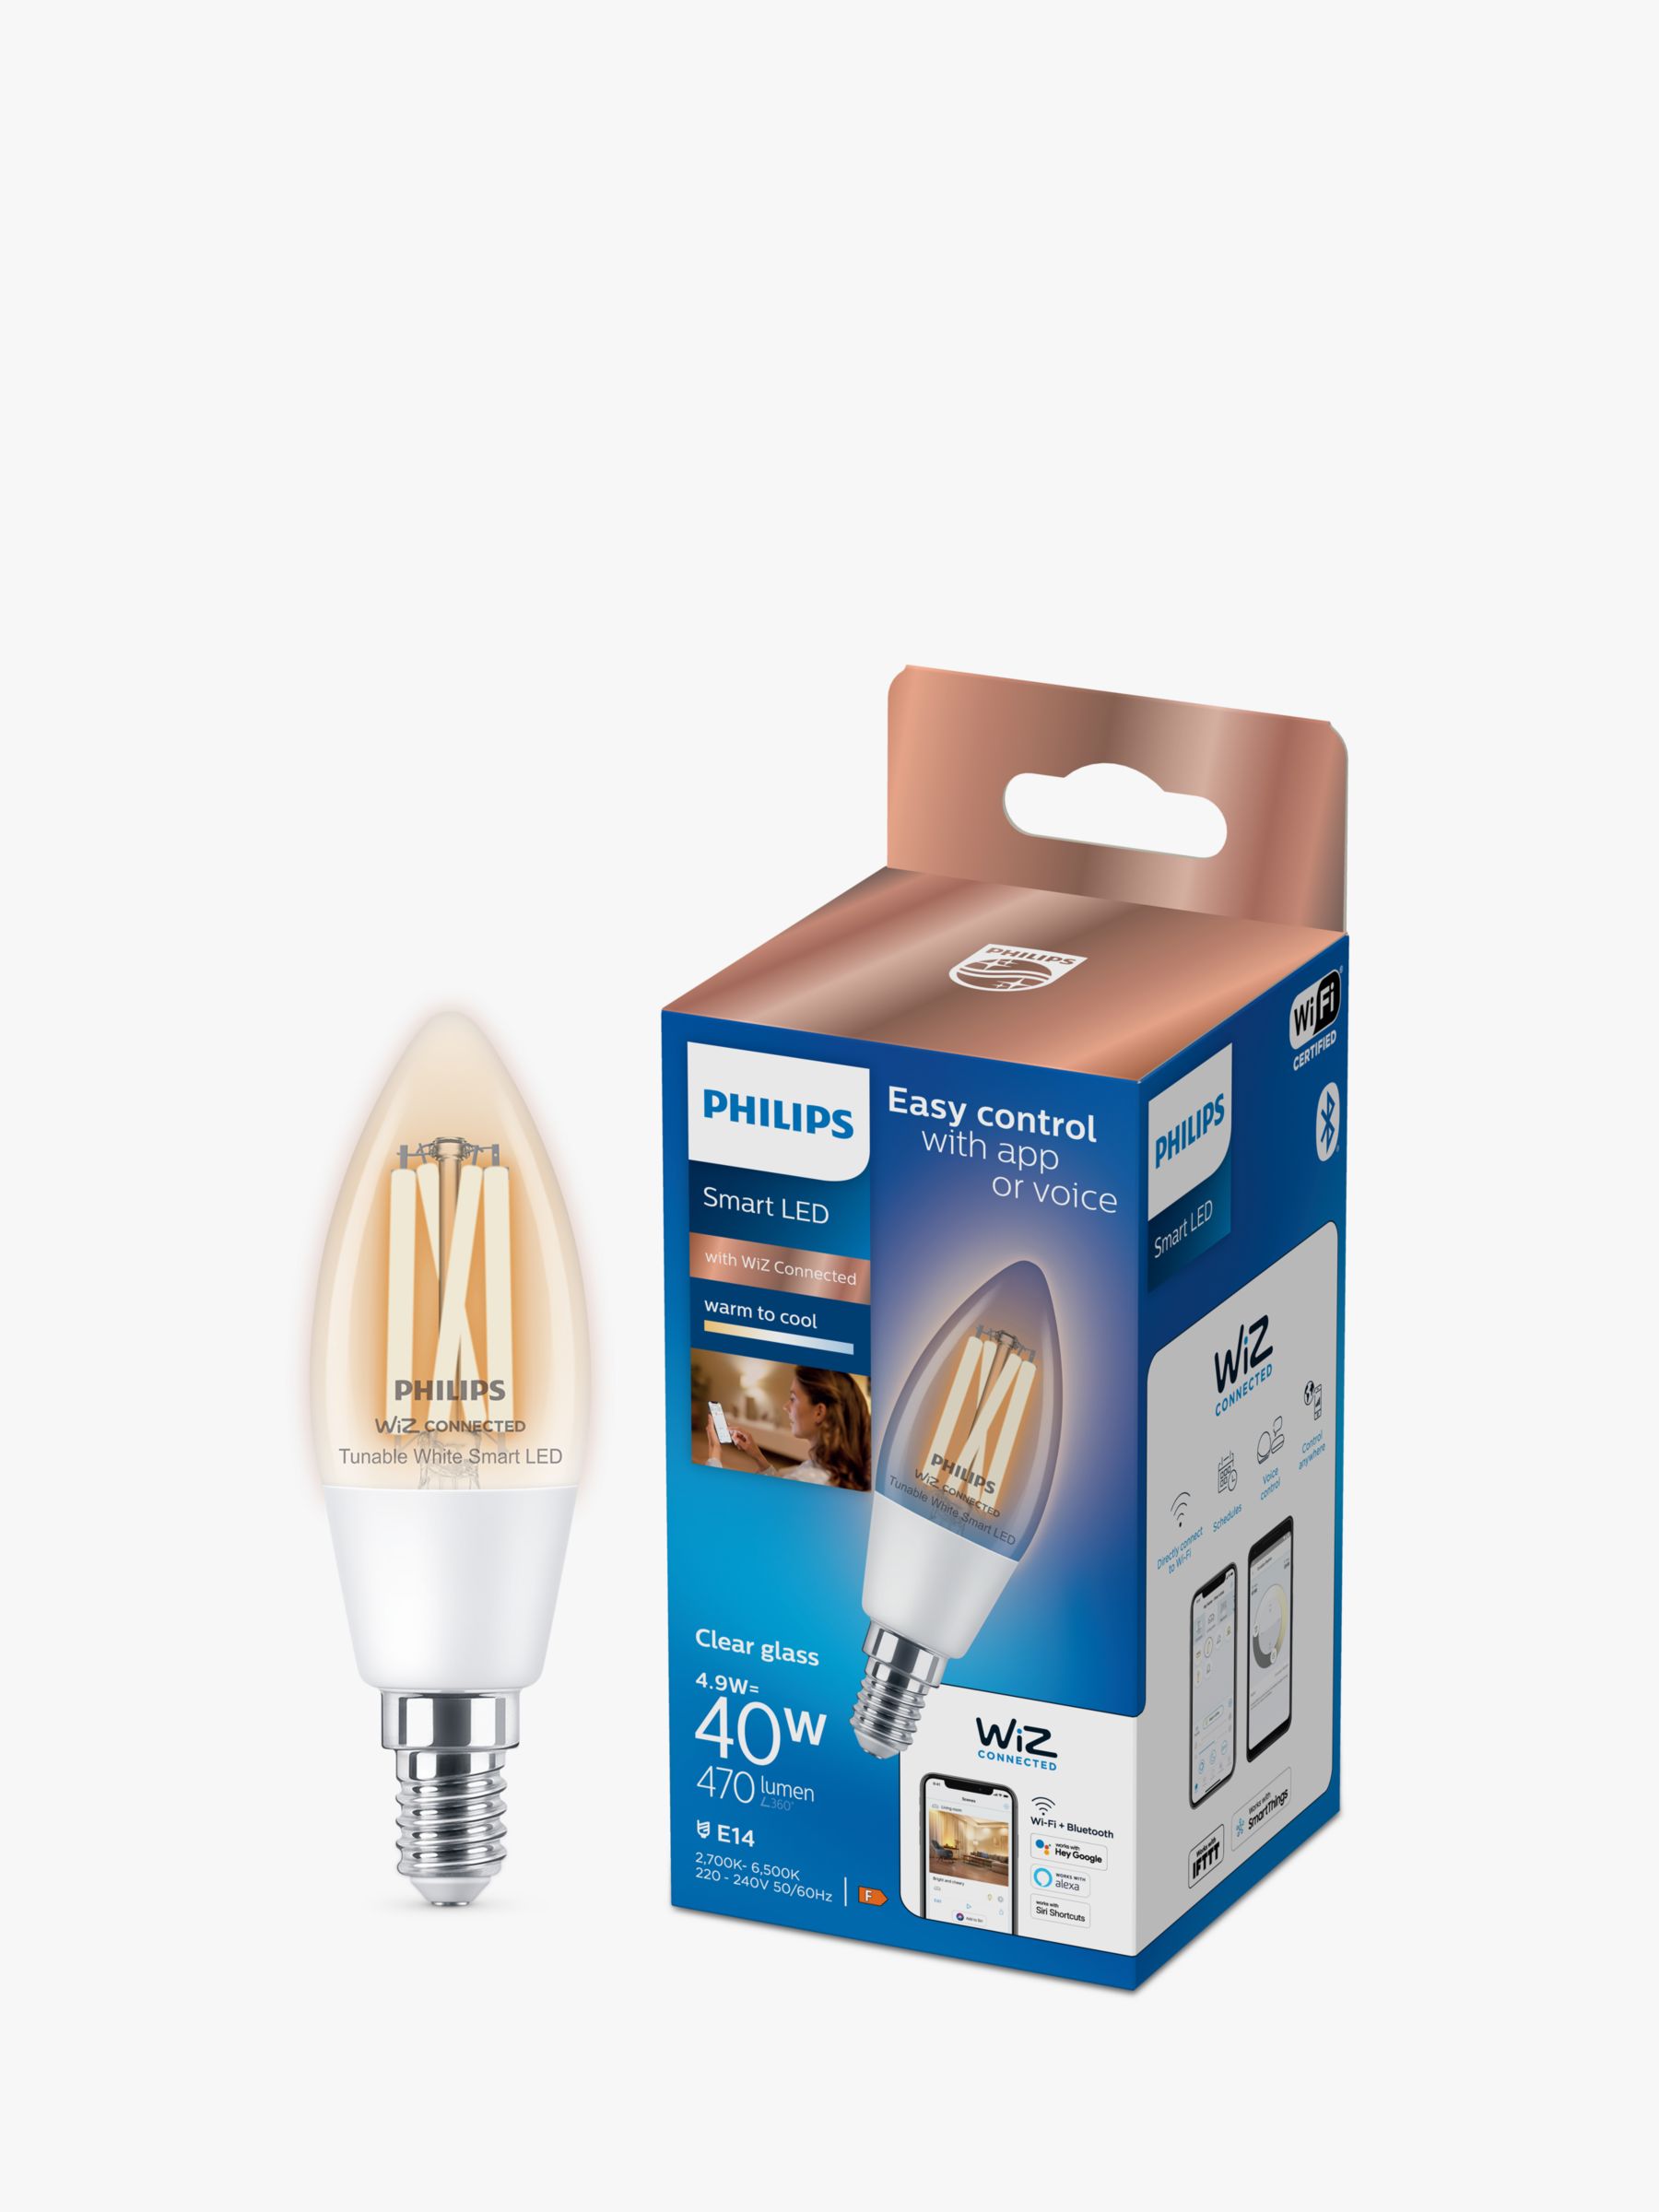 Philips Smart LED 5W E14 Dimmable Warm-to-Cool Candle Bulb